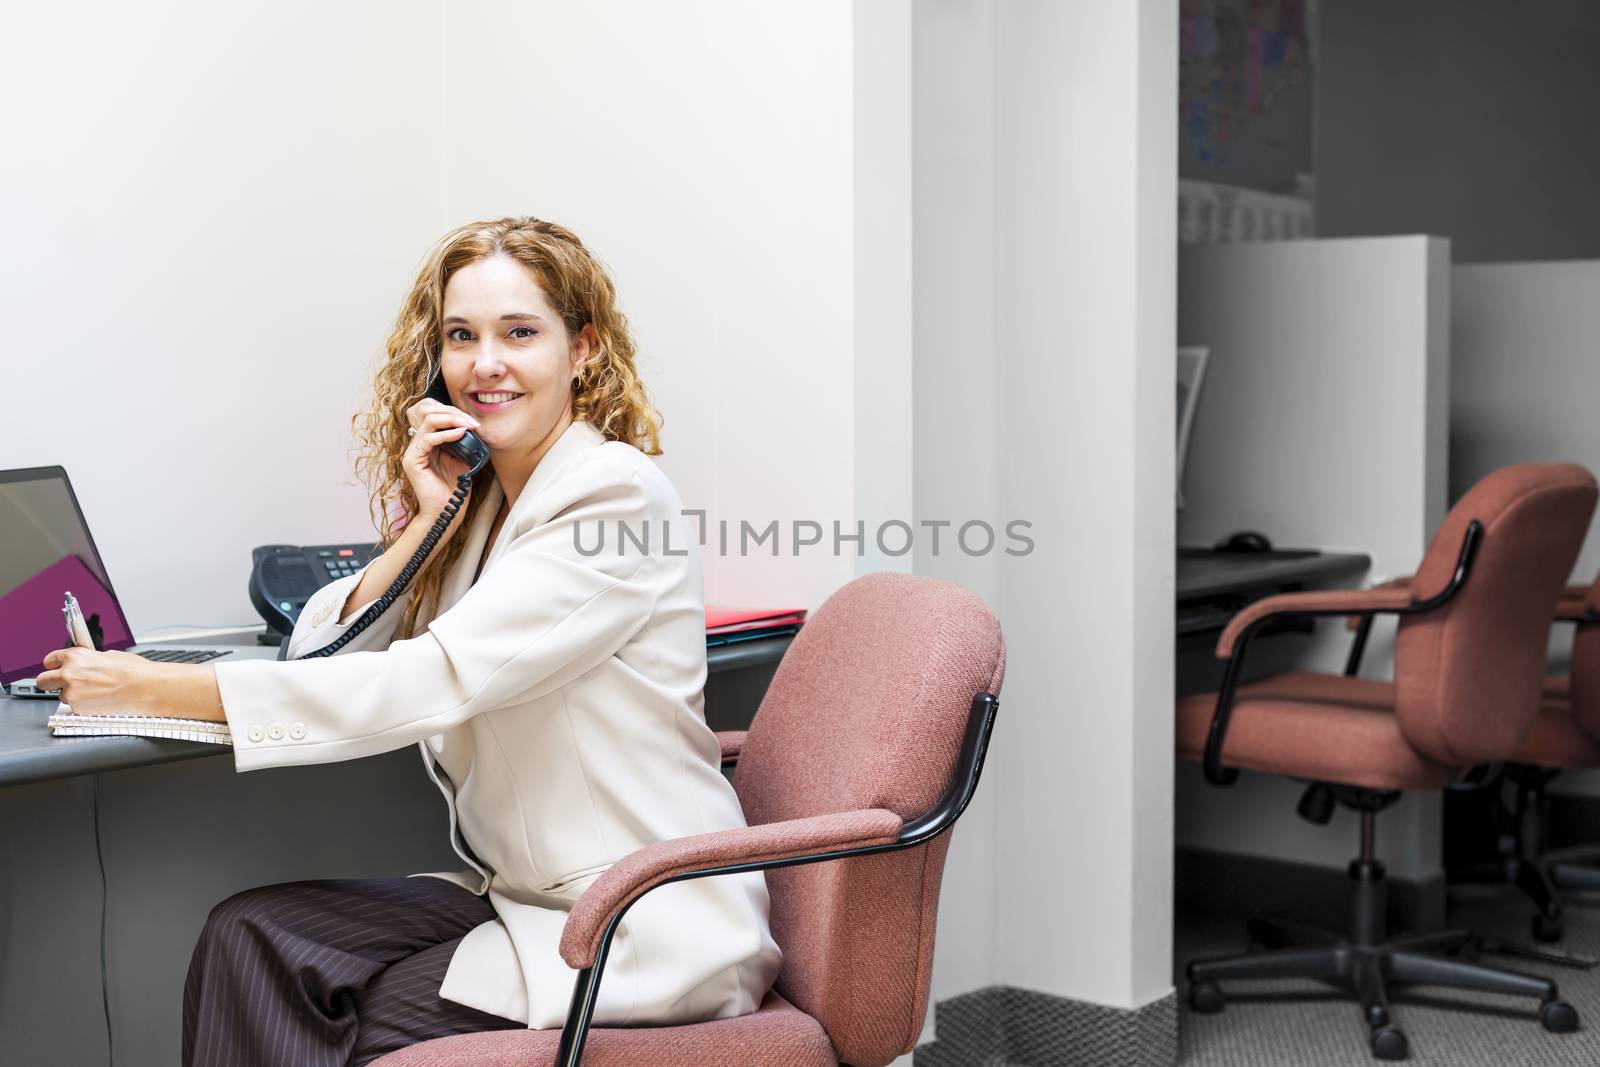 Businesswoman on phone taking notes in office workstation